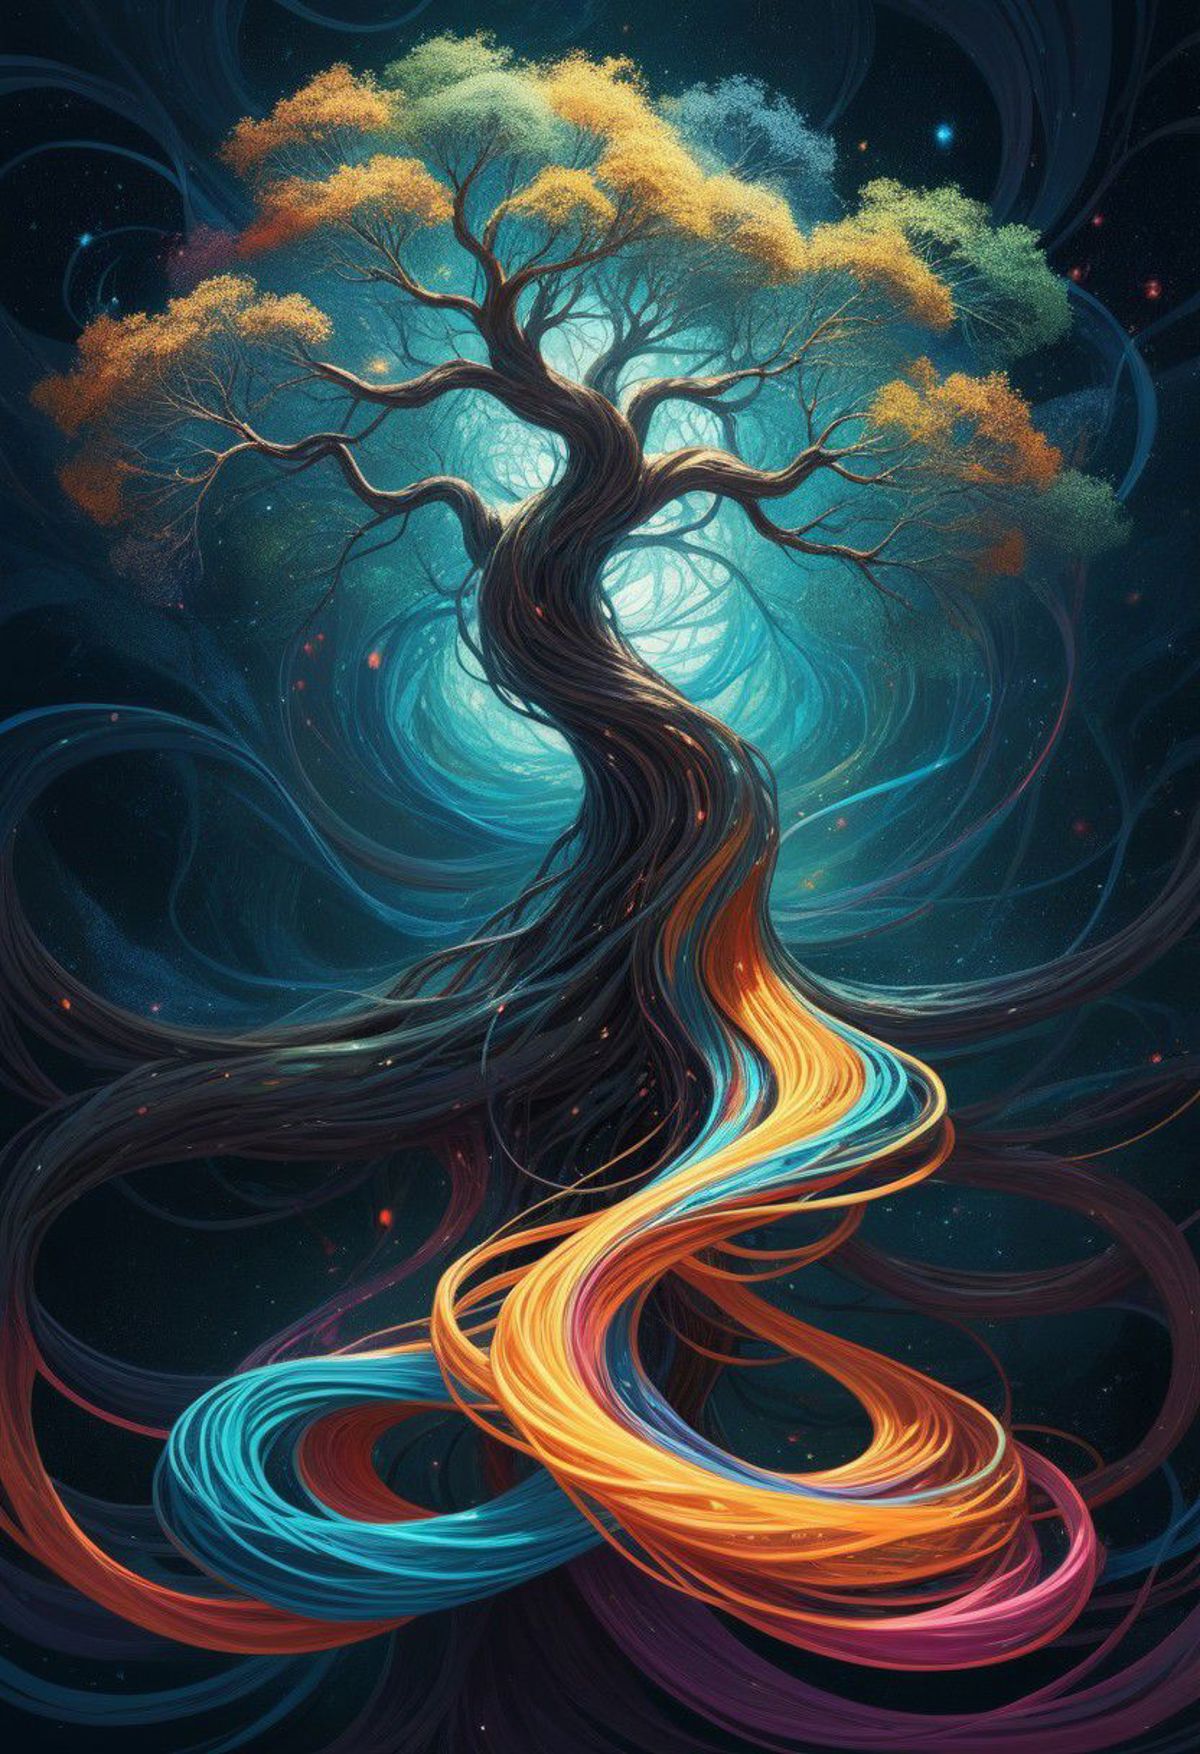 Artistic Painting of a Tree with its Roots and Branches in a Dark Blue Sky